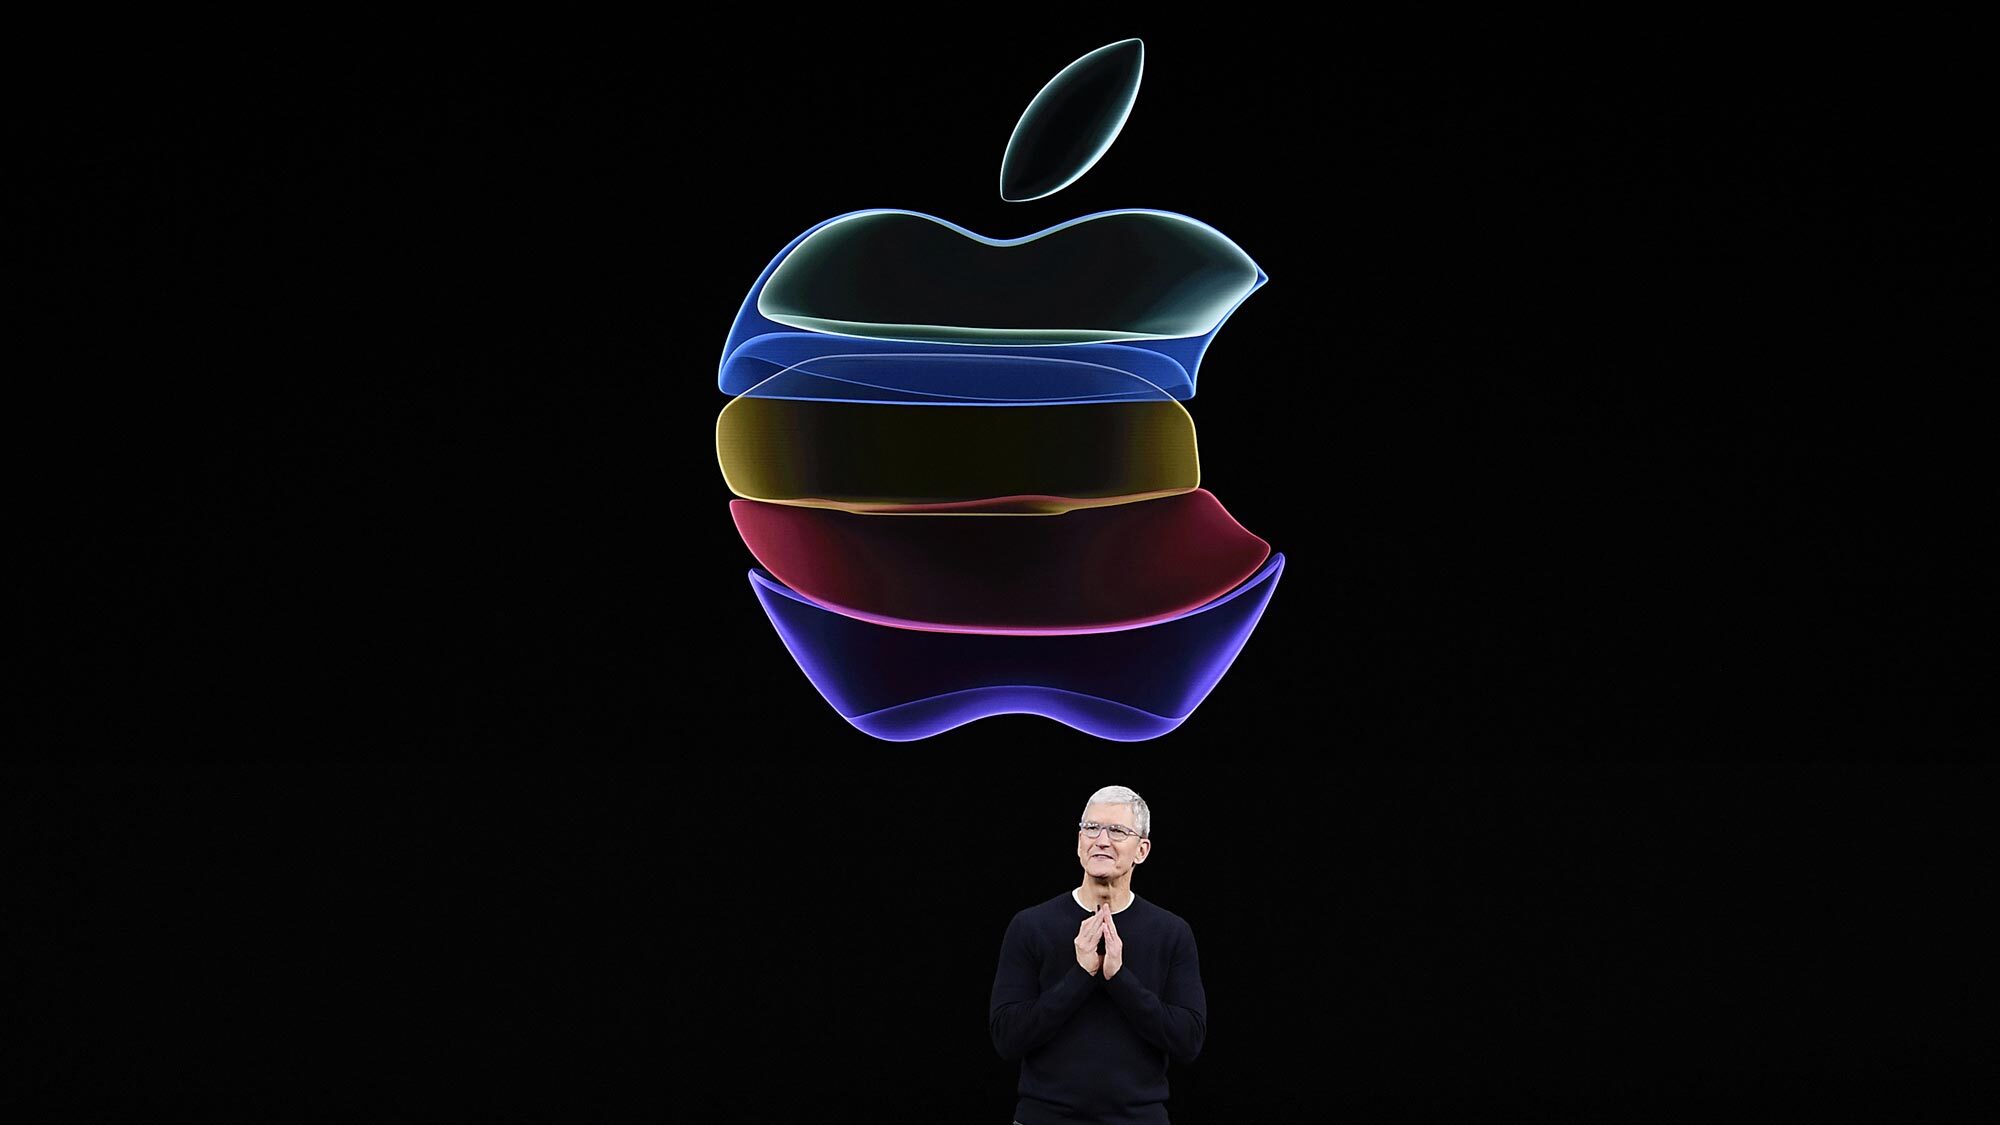 Beyond the Apple September 7 event — what's next for Apple | Tom's Guide